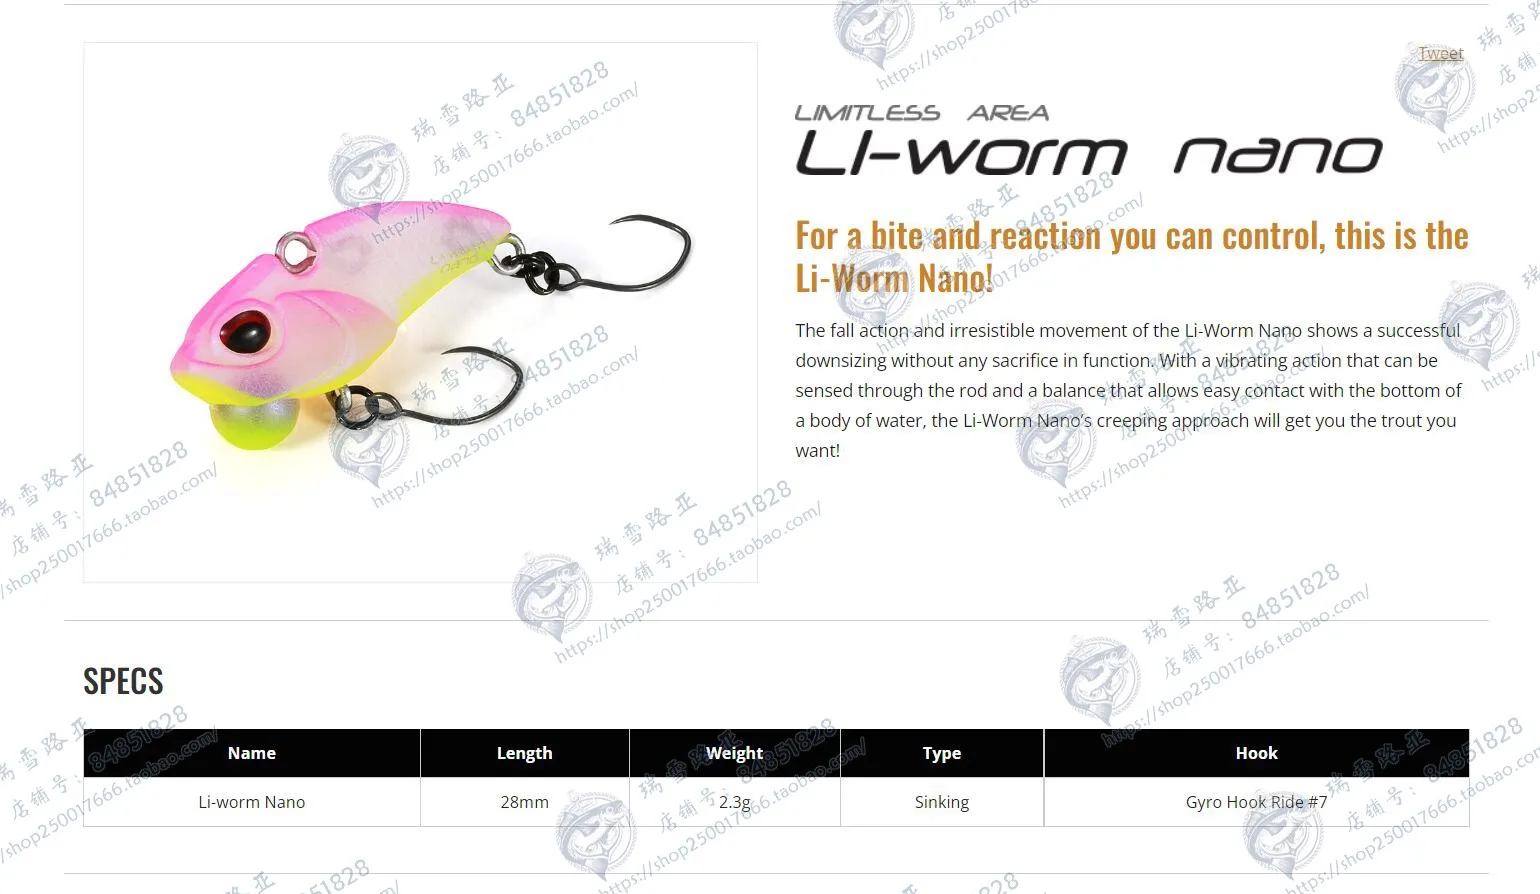 

Imported VALKEIN LI-WORM NANO Micro-VIB 2.3 G Brook Horse Mouth Pouting Trout Lure Bait.